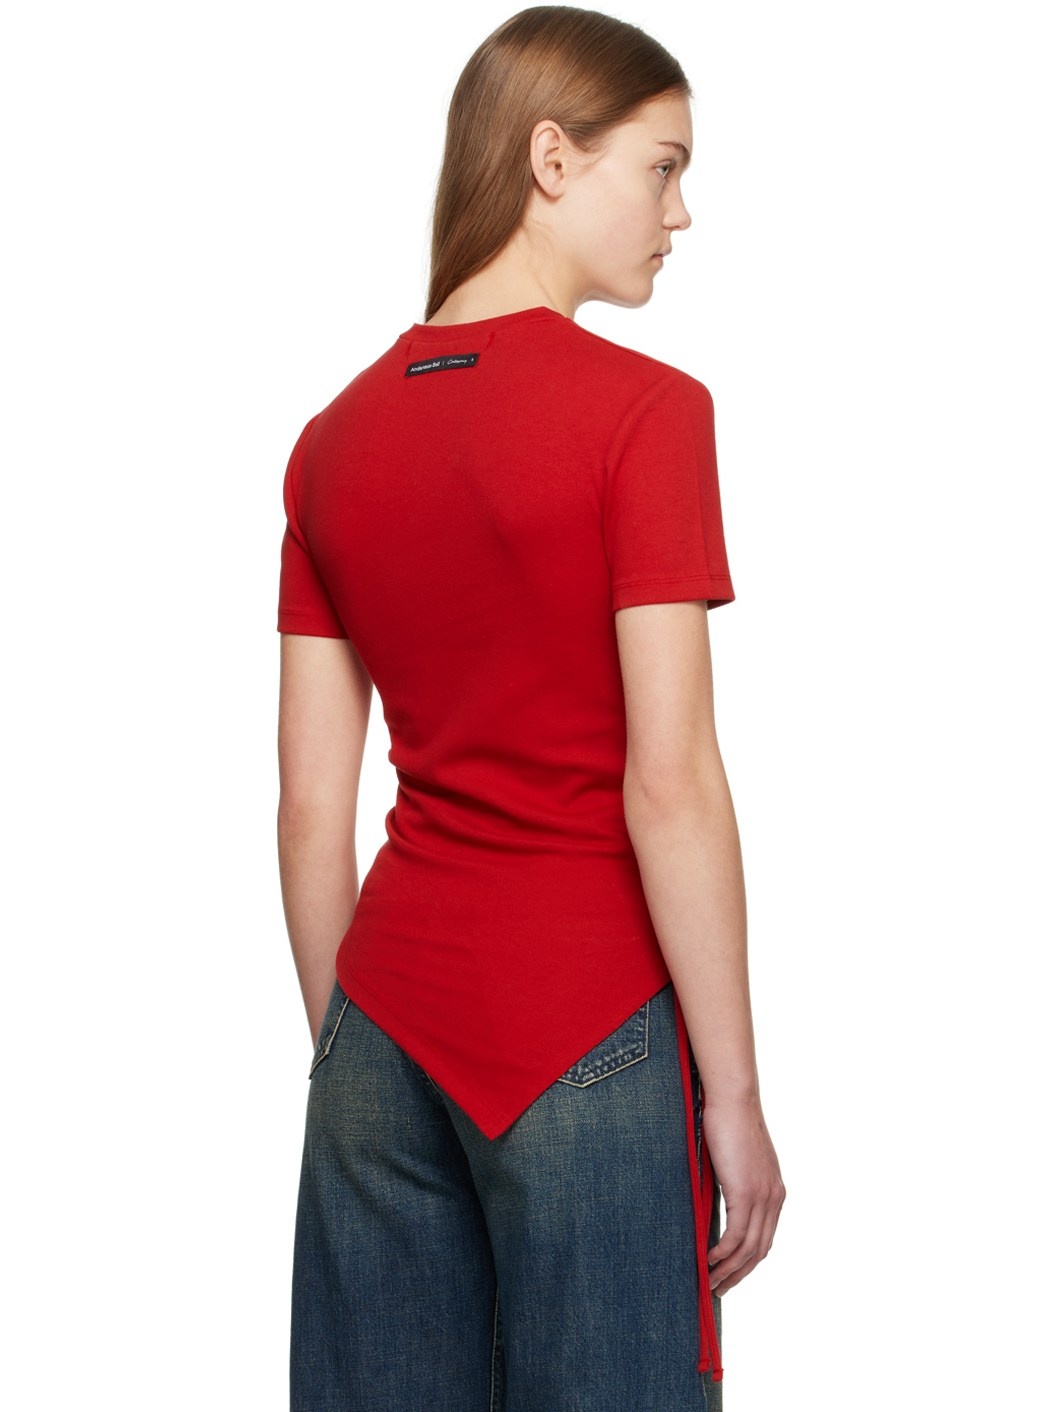 SSENSE Exclusive Red Cindy T-Shirt - 3